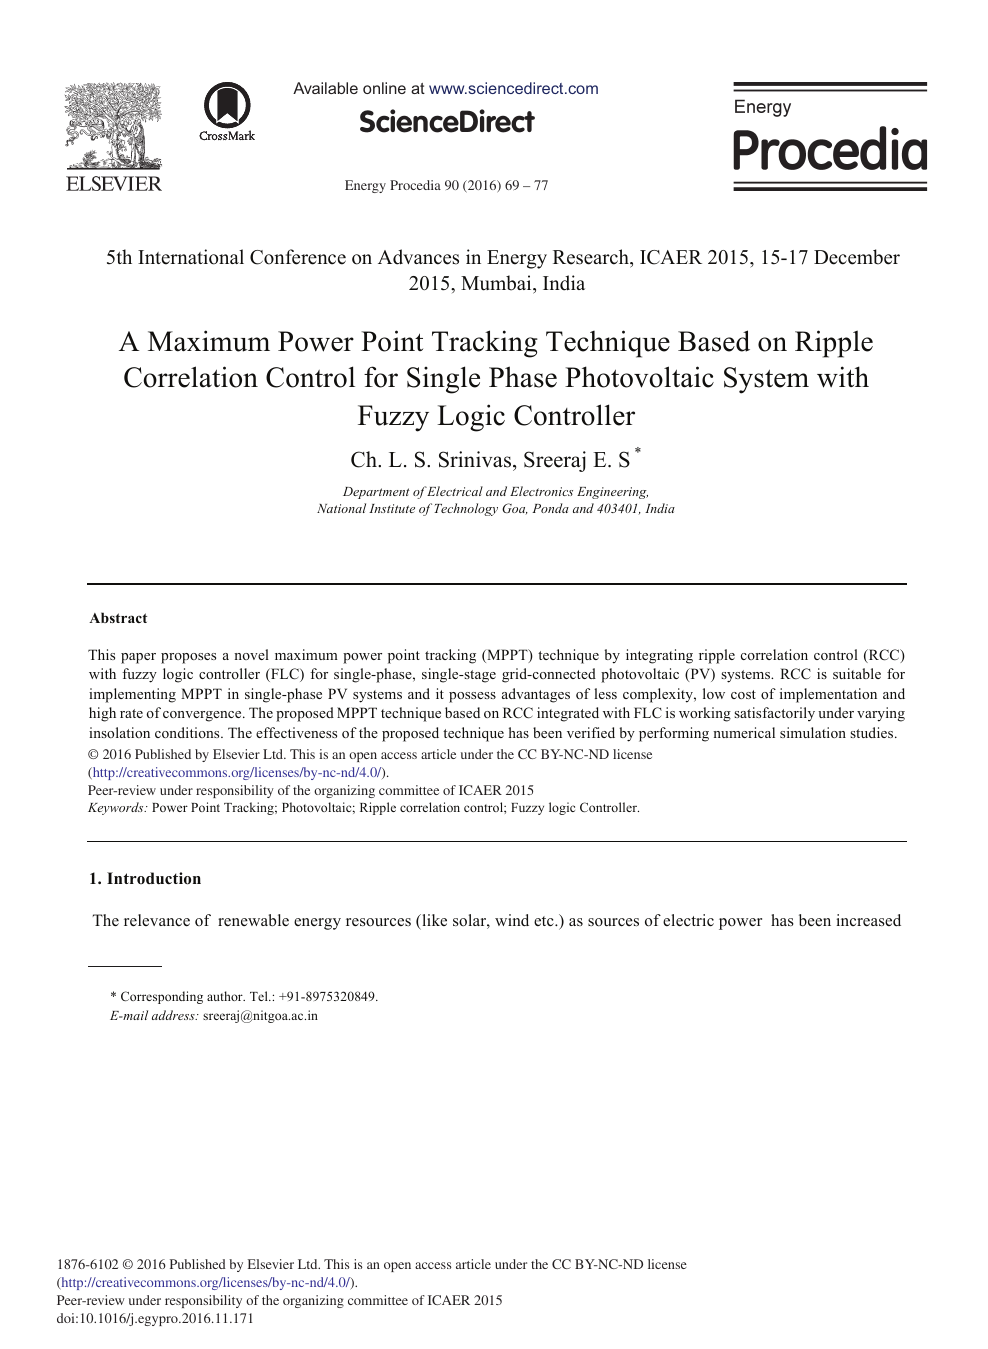 A Maximum Power Point Tracking Technique Based On Ripple Correlation Control For Single Phase Photovoltaic System With Fuzzy Logic Controller Topic Of Research Paper In Materials Engineering Download Scholarly Article Pdf